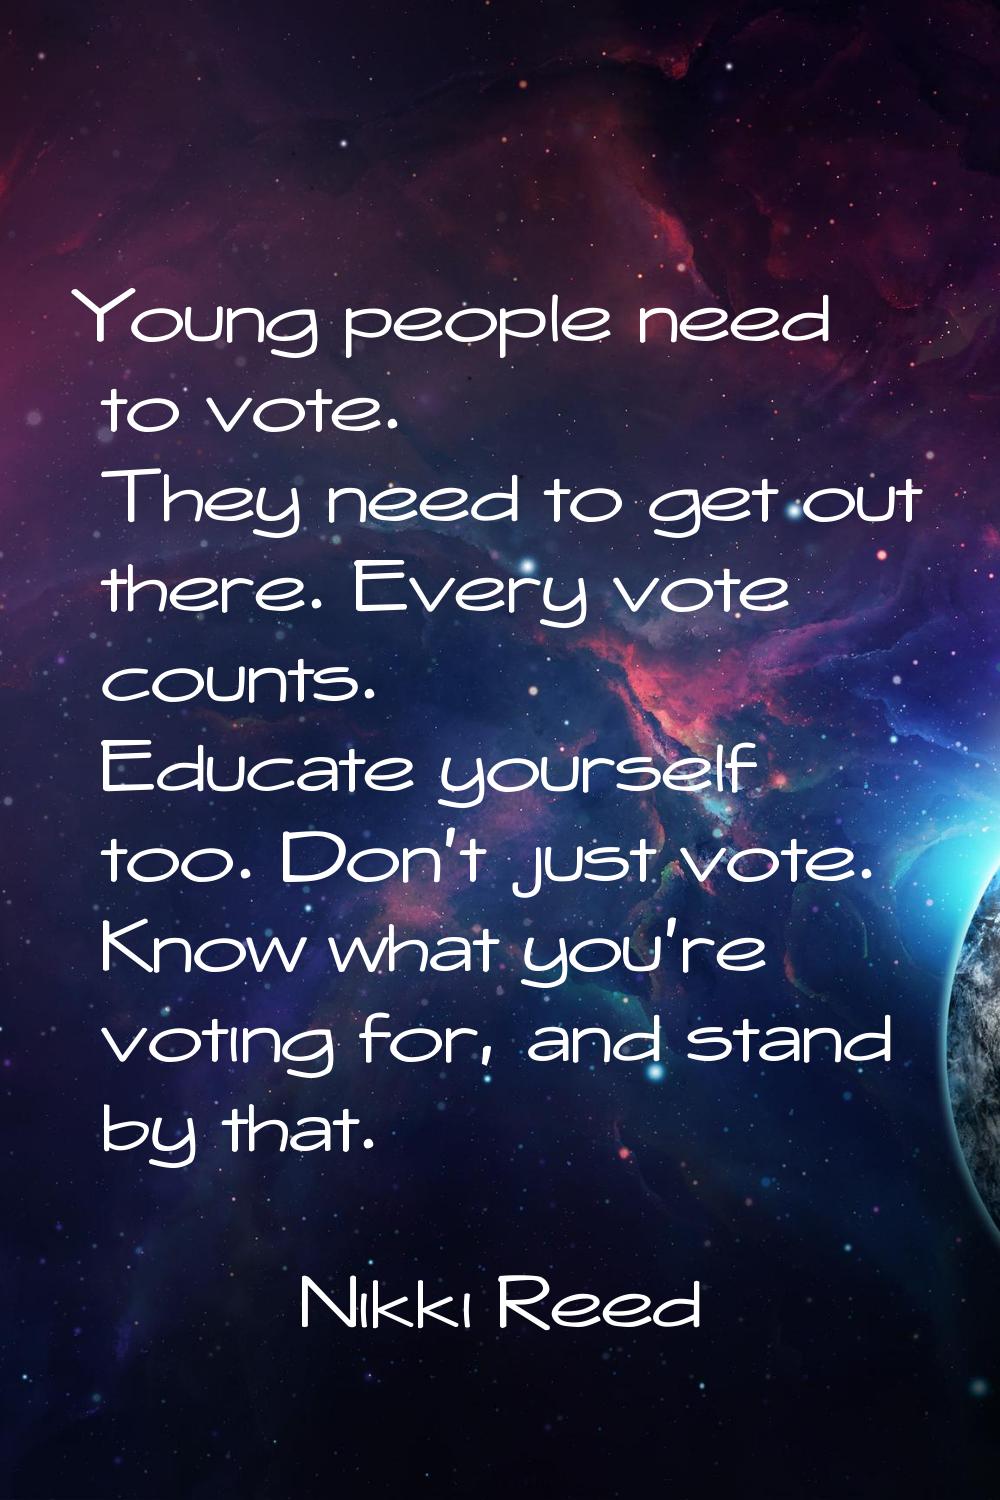 Young people need to vote. They need to get out there. Every vote counts. Educate yourself too. Don